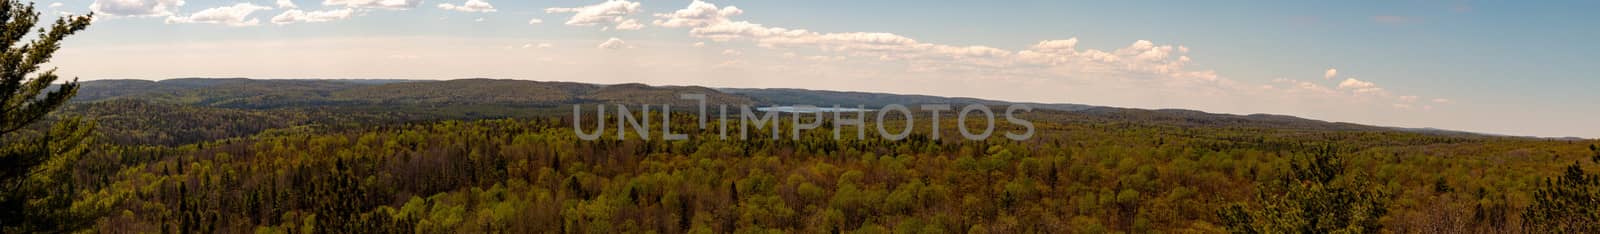 Panorama photo of lookout trail in algonquin park. It is a short uphill hike to get a view of the entire park